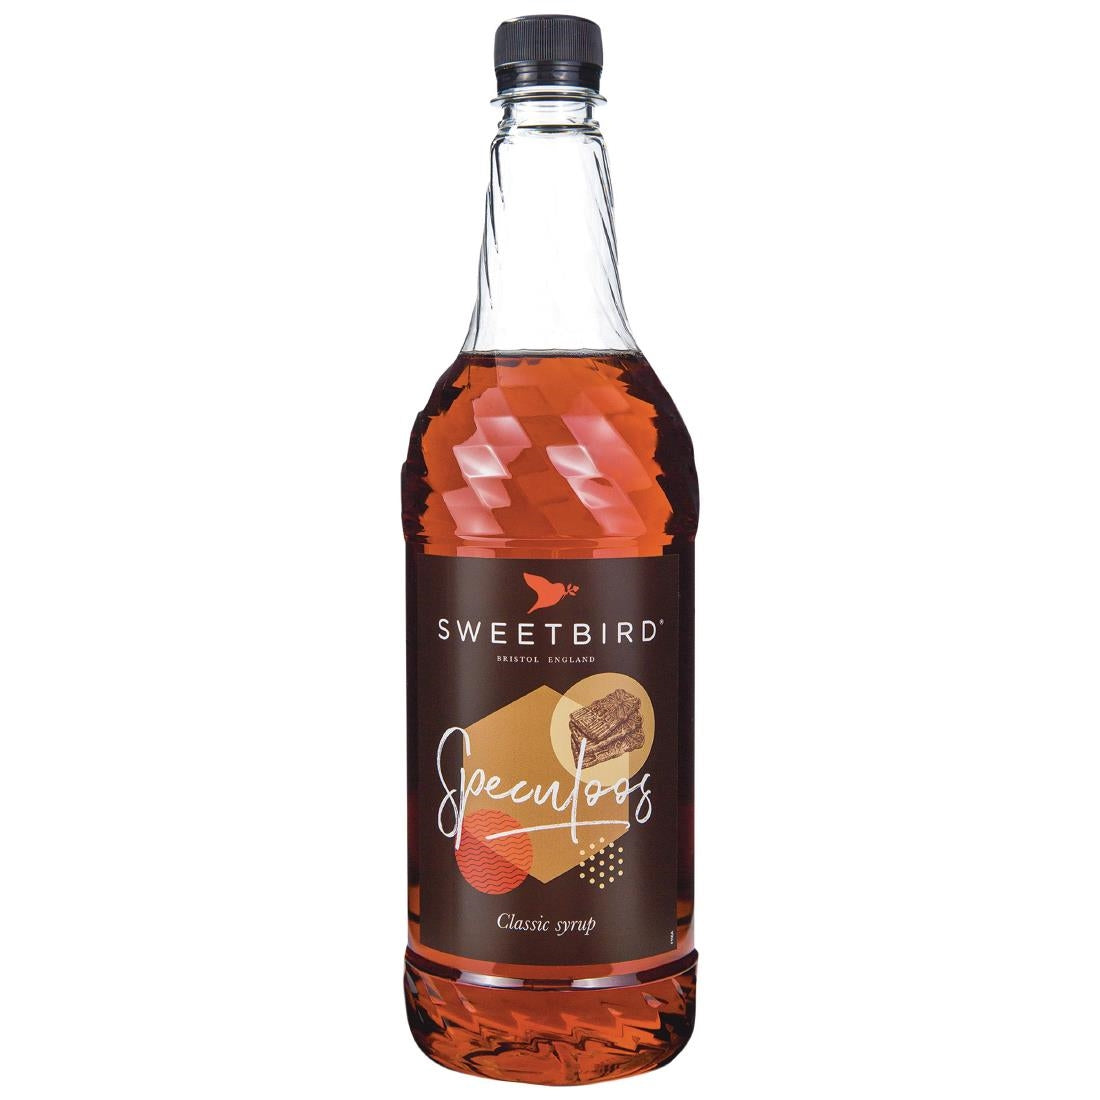 CZ257 Sweetbird Speculoos Classic Syrup 1Ltr